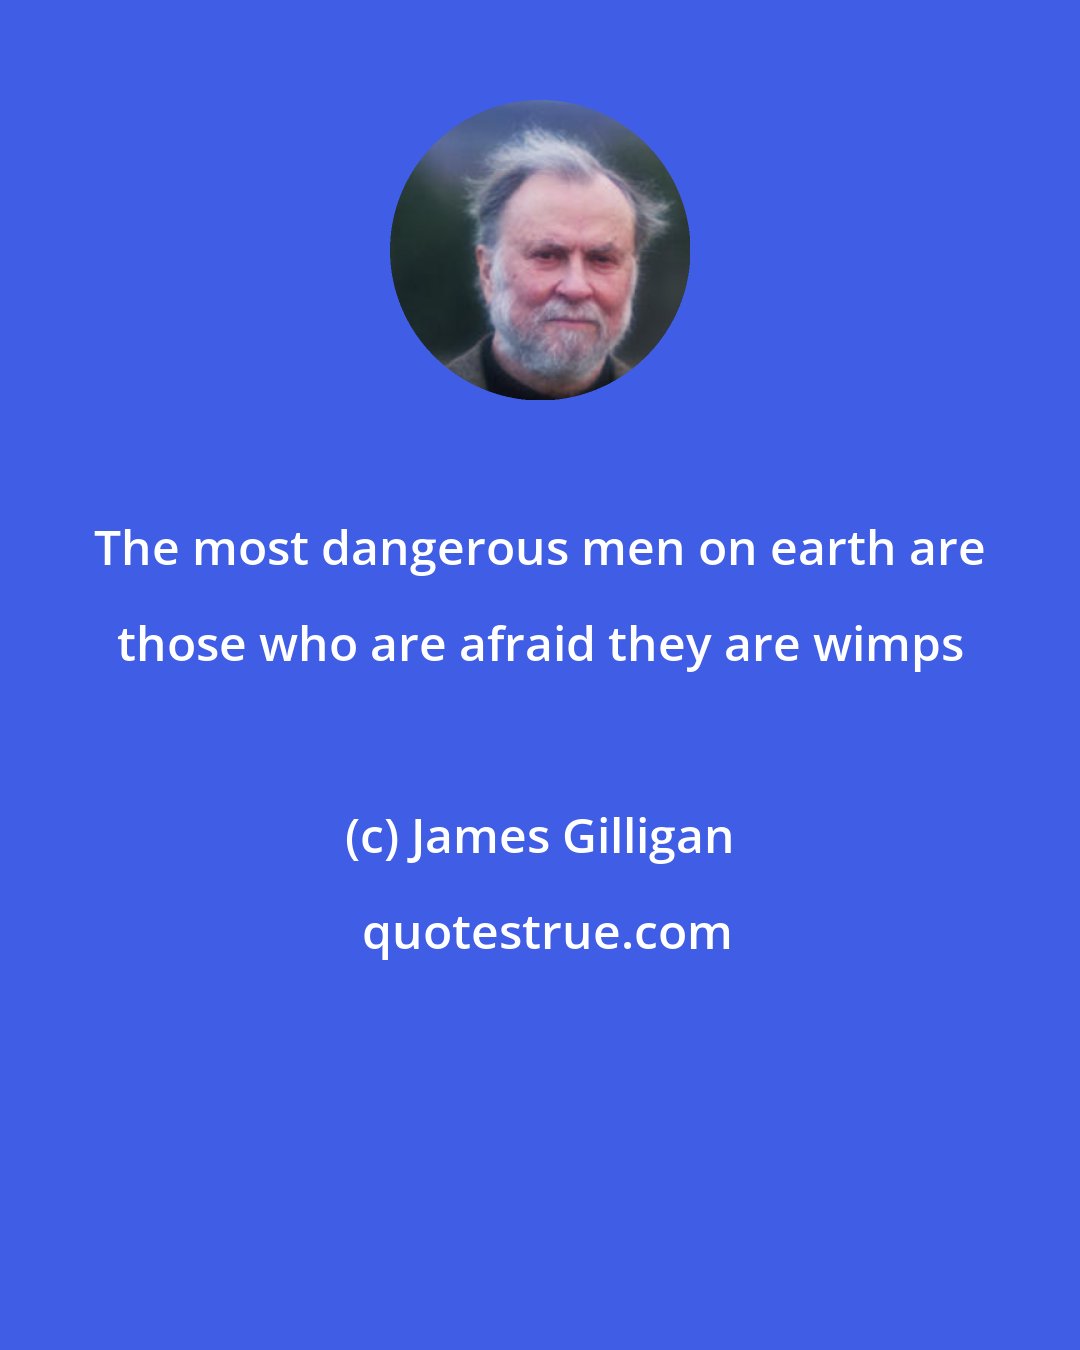 James Gilligan: The most dangerous men on earth are those who are afraid they are wimps